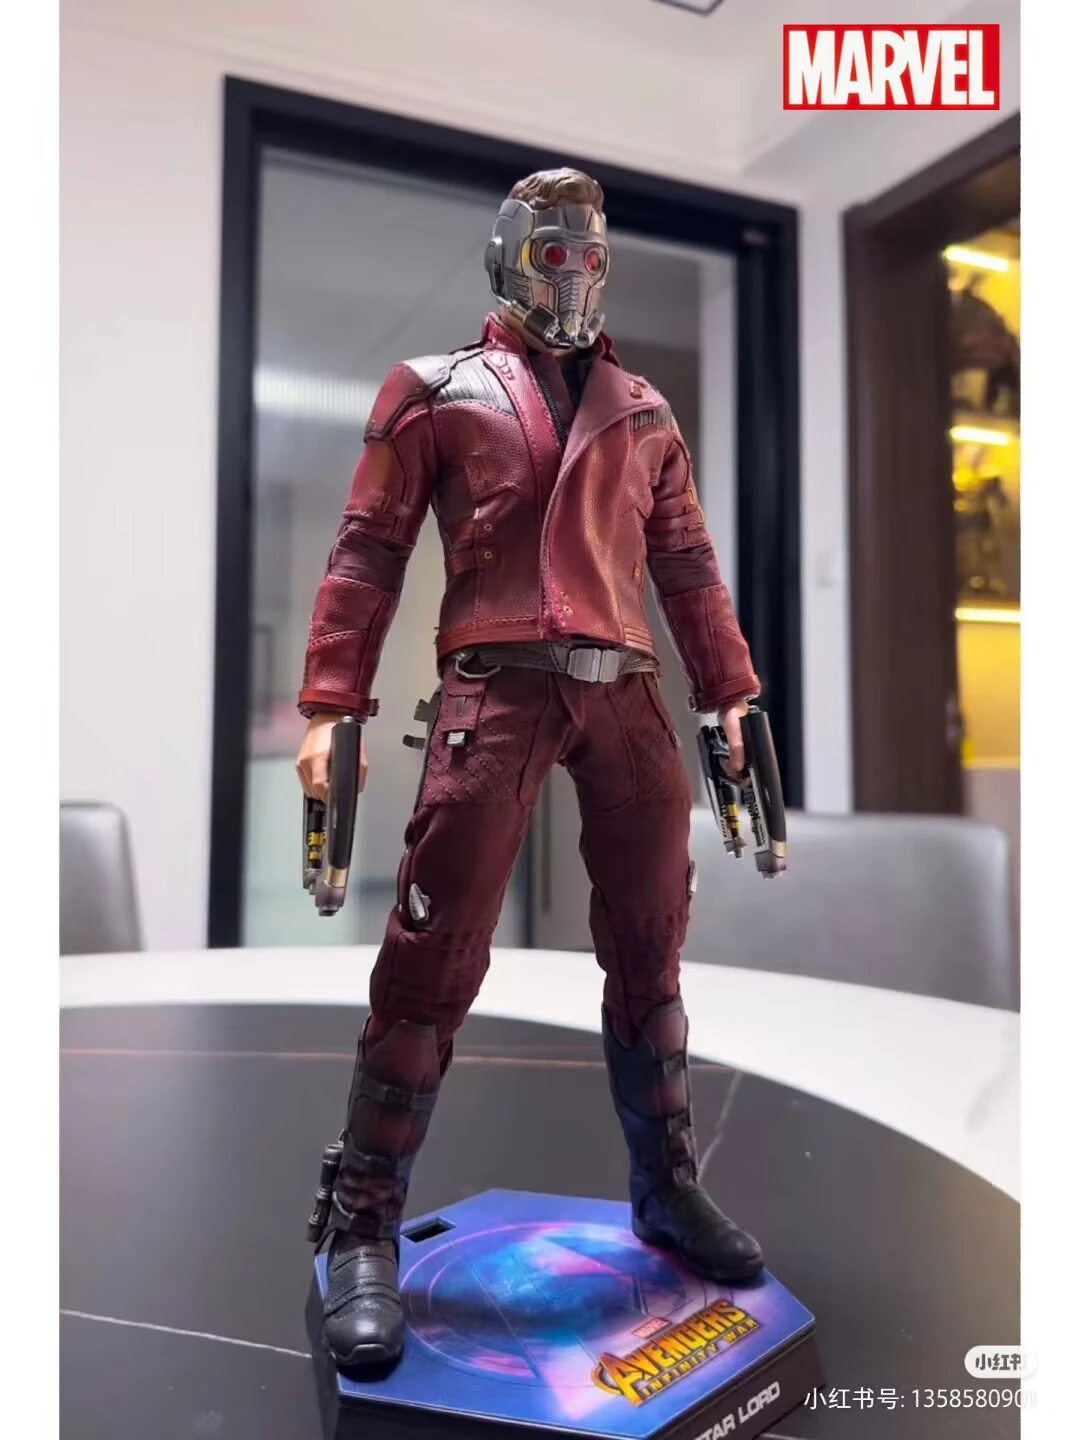 

Avengers Mms539 Star Lord Peter Quill Infinity War In Stock 100% Original Hottoys Ht Movie Character Model Art Collection Toys